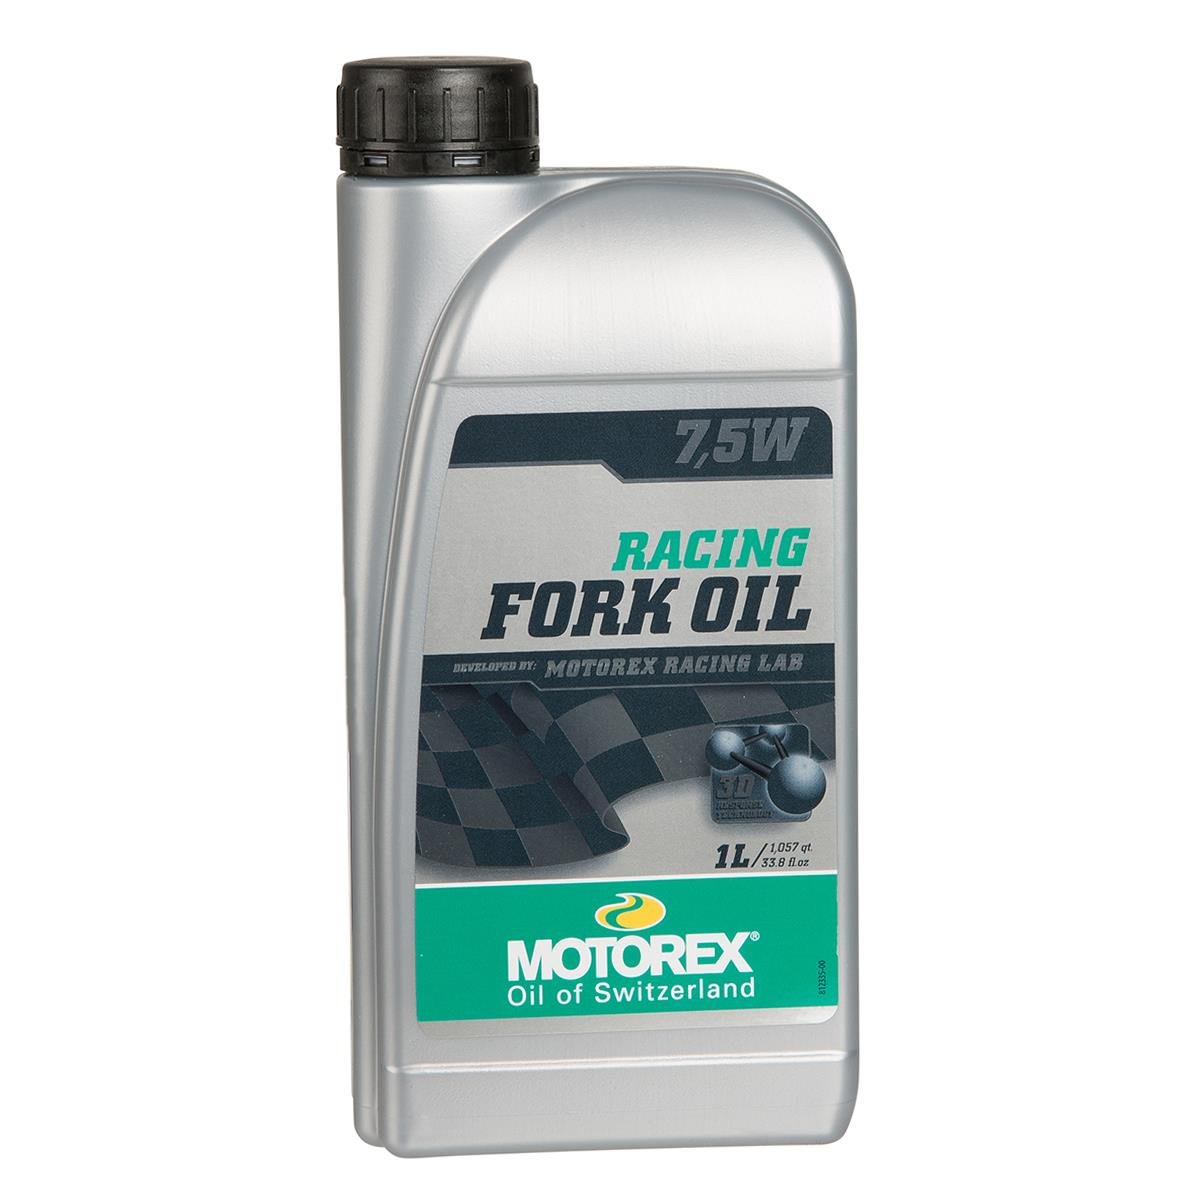 Motorex Olio Forcelle Racing Fork 1 Litro, 7.5 W